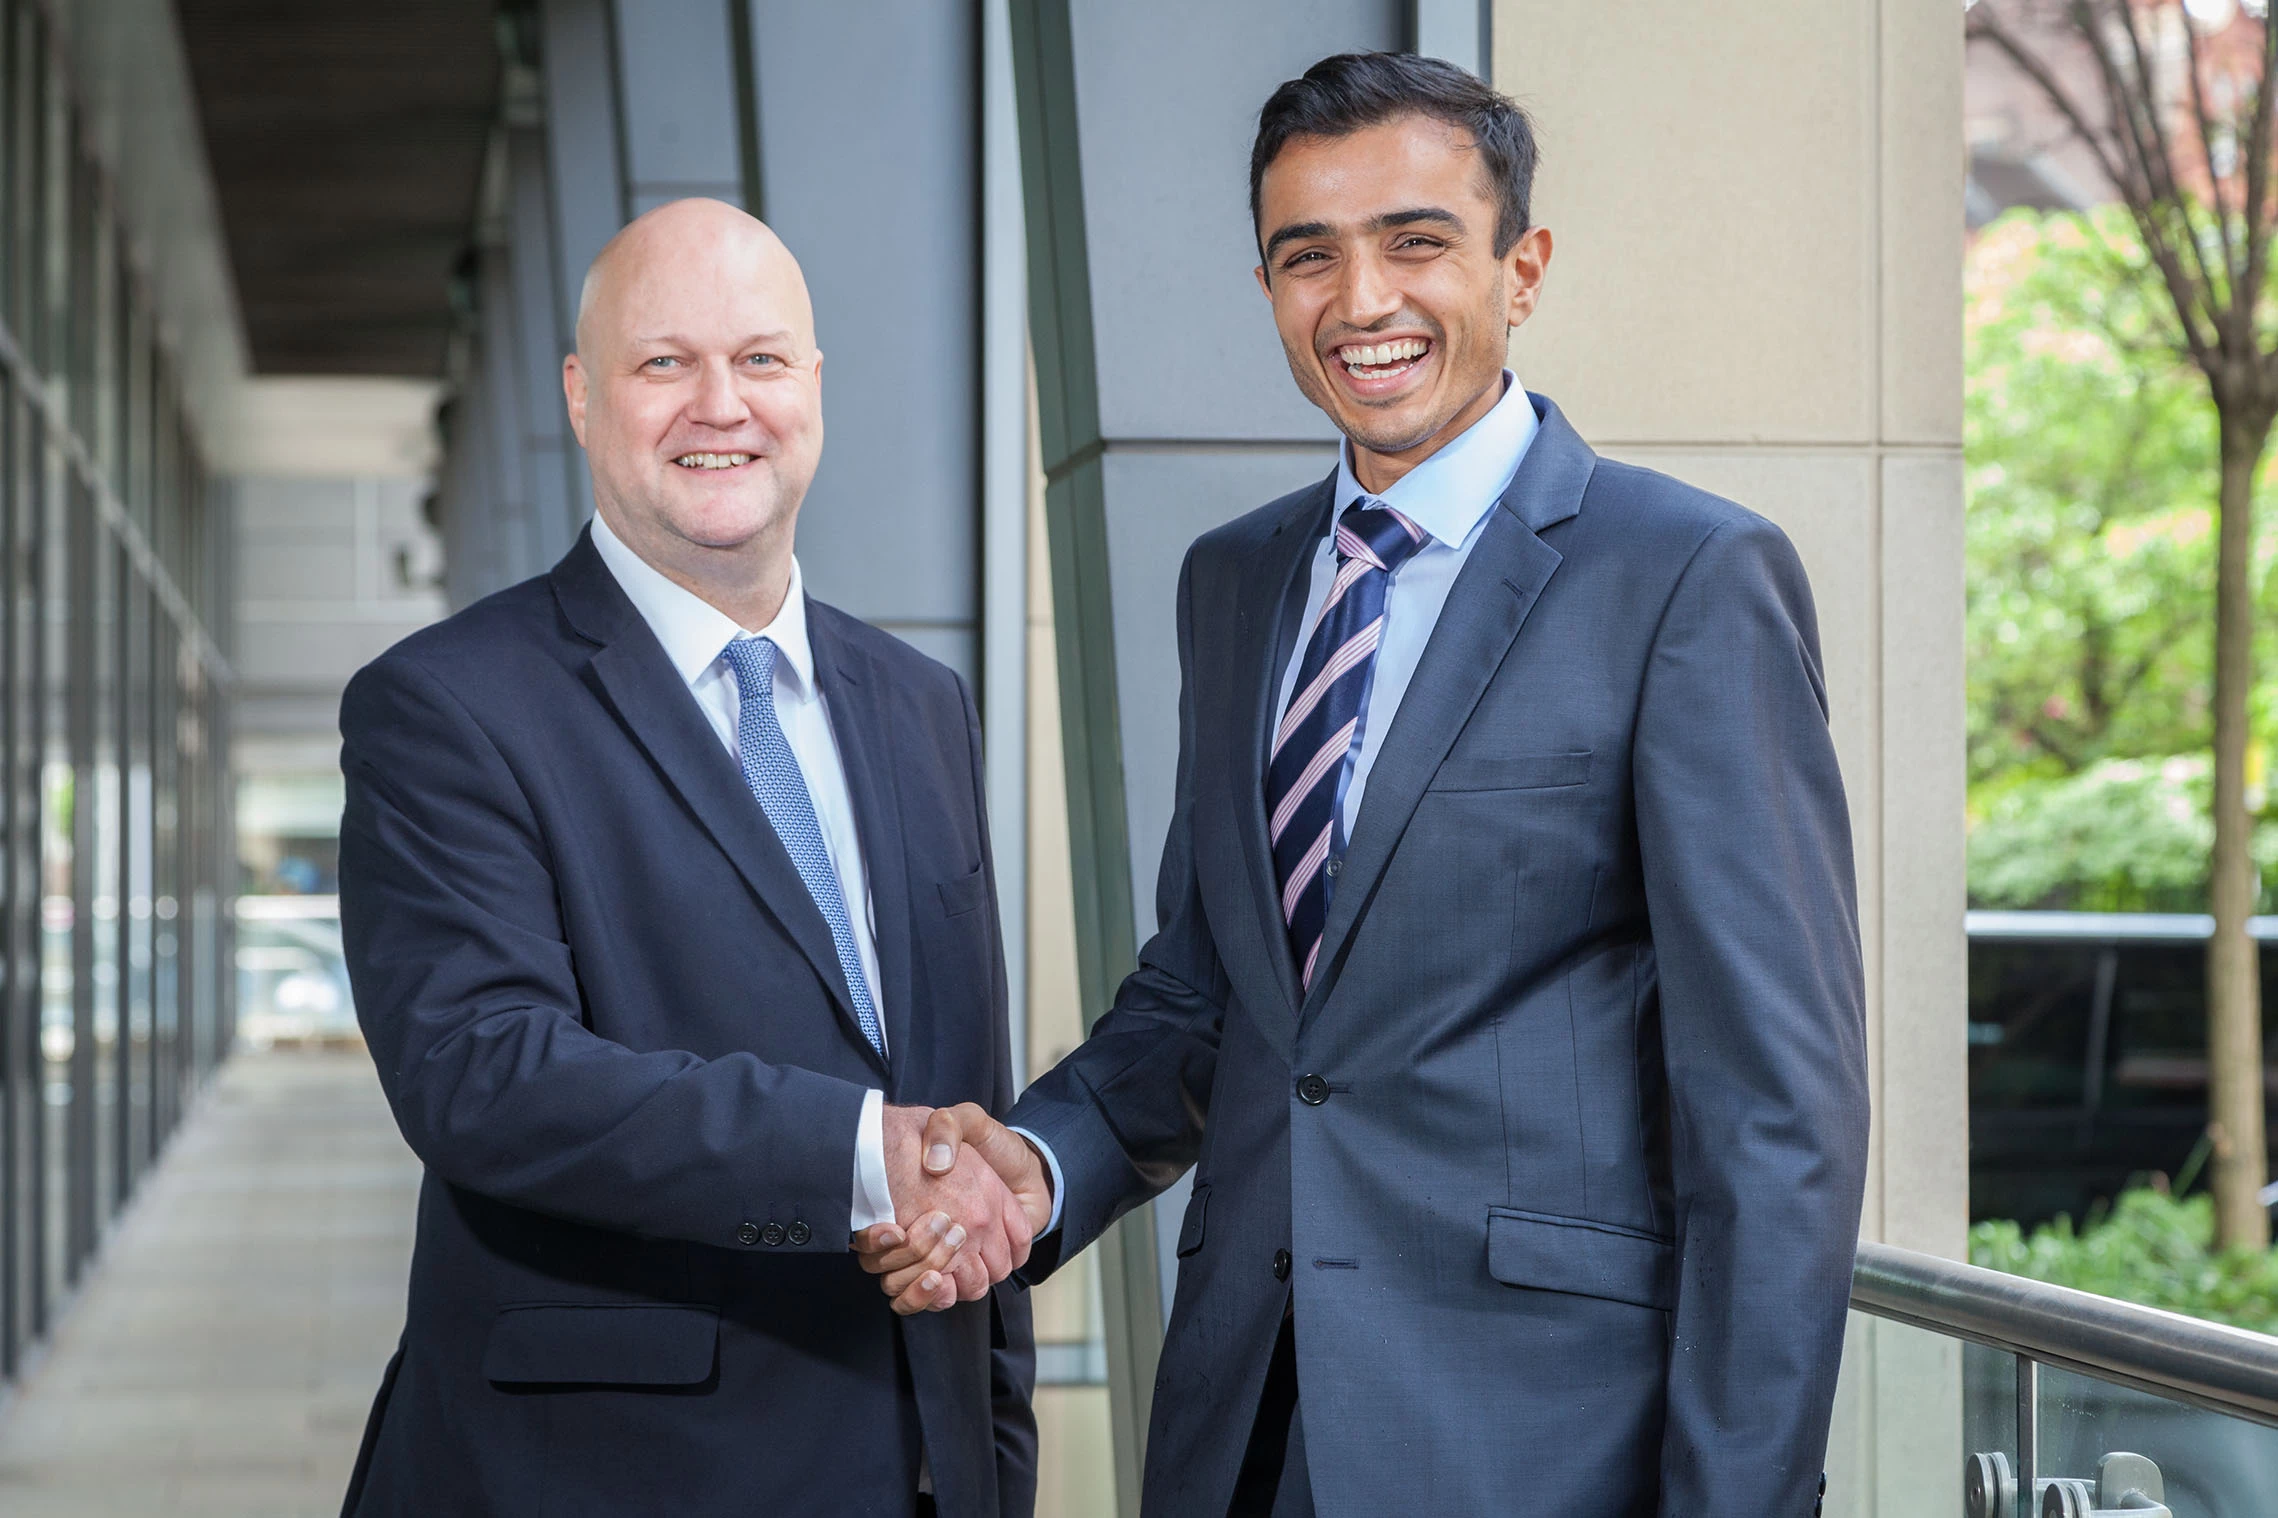 Abbas Khan (right) is welcomed to Taylor&Emmet by head of employment law, Simon Brian. 